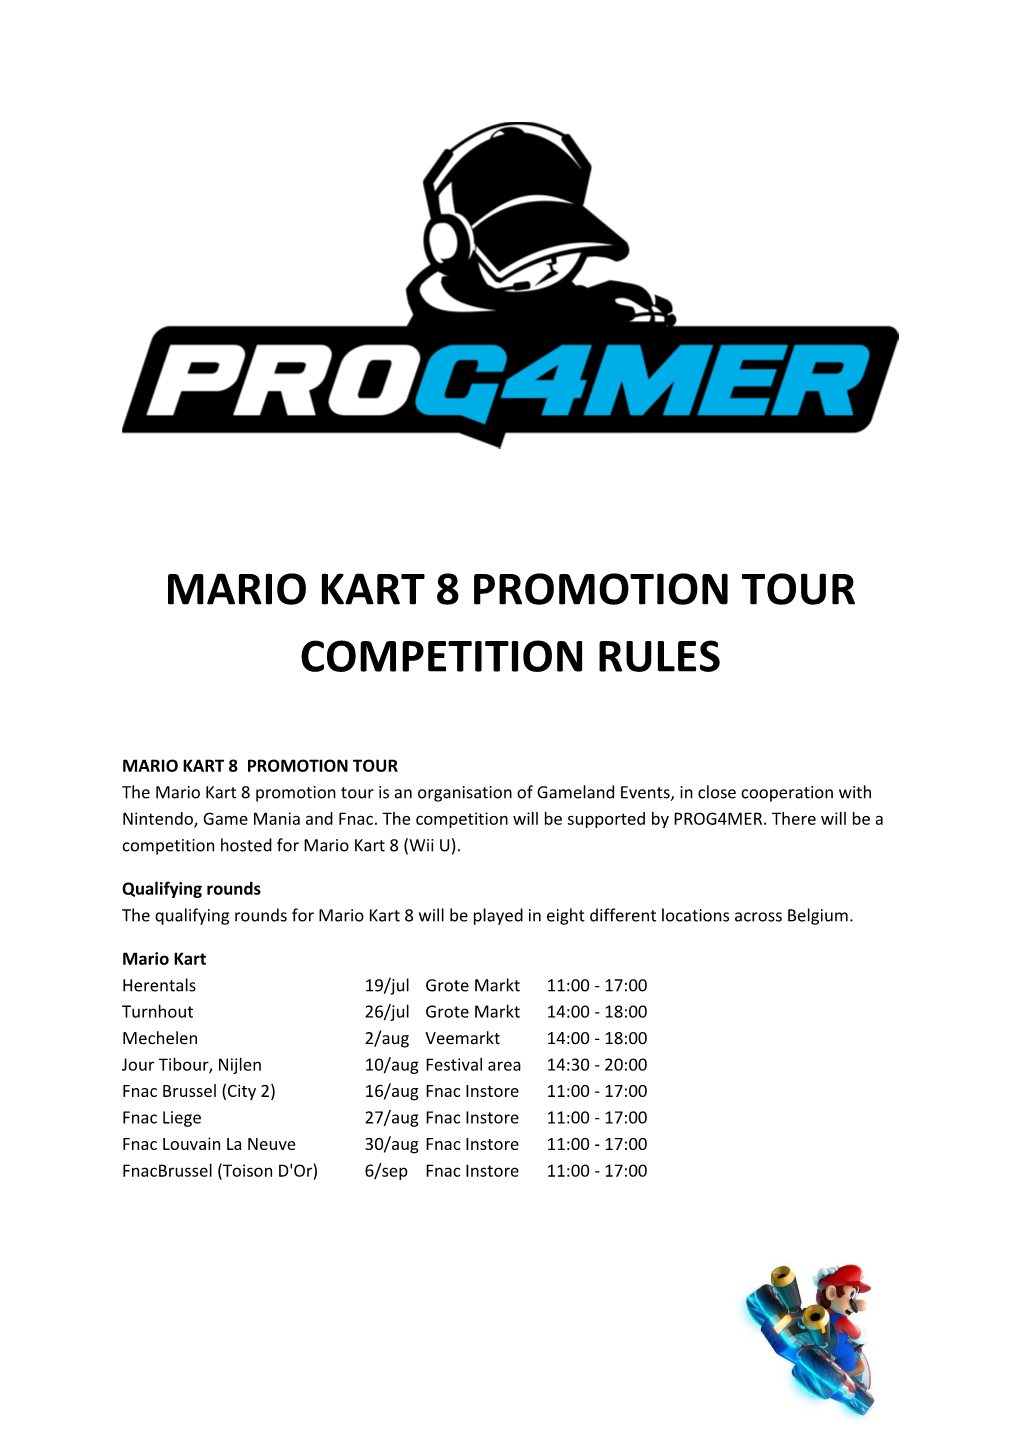 Mario Kart 8 Promotion Tour Competition Rules